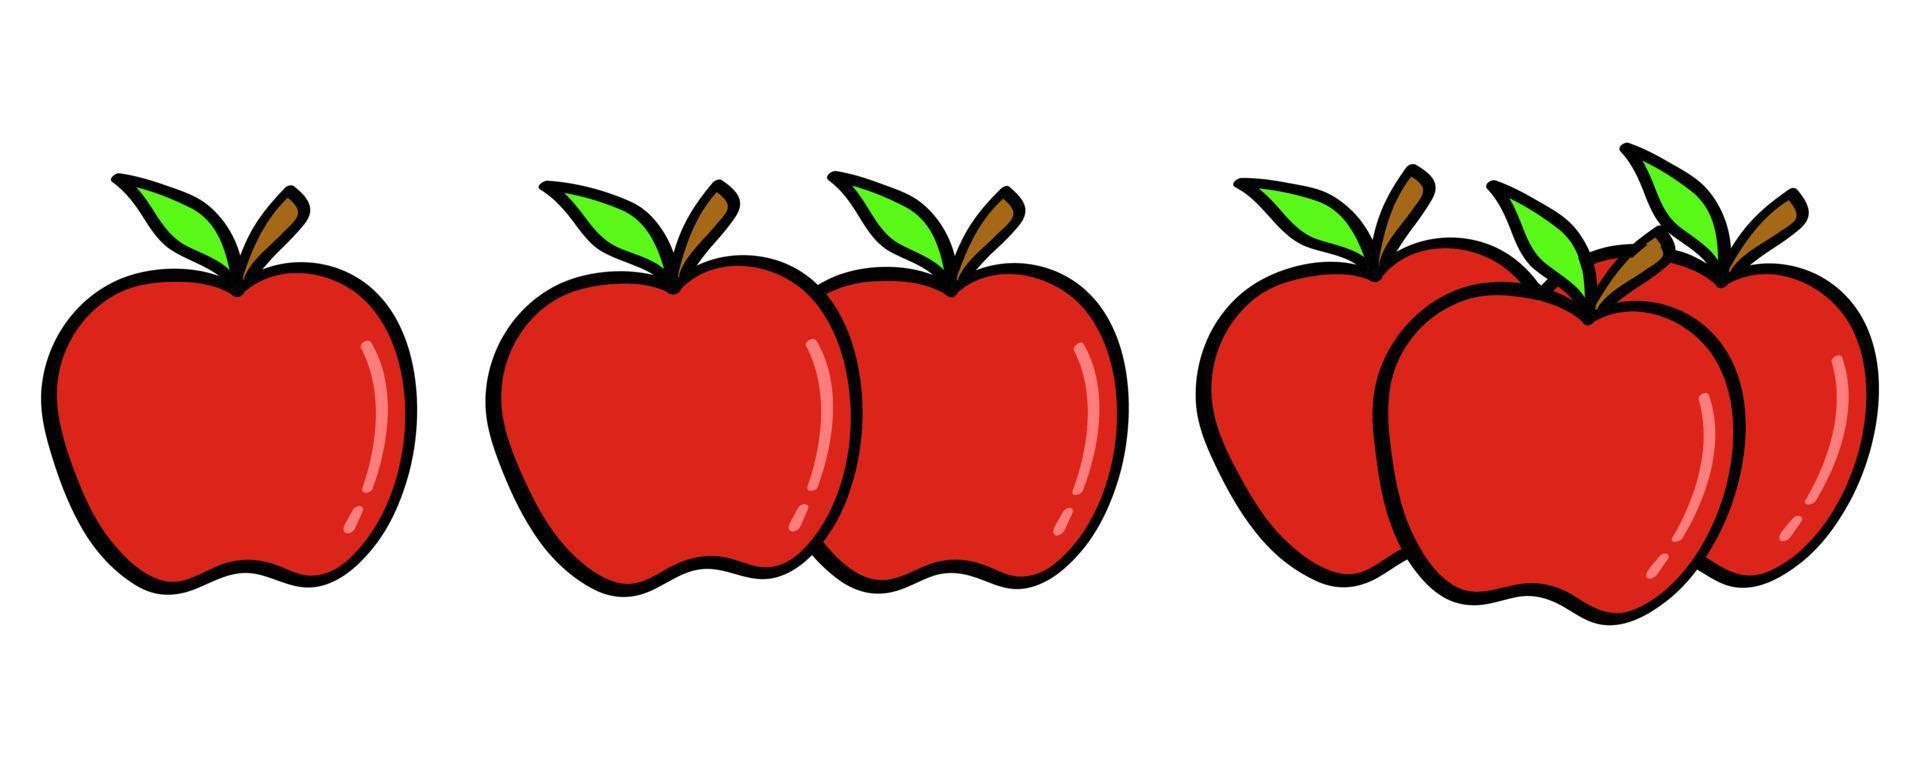 hand drawn apple in doodle style vector